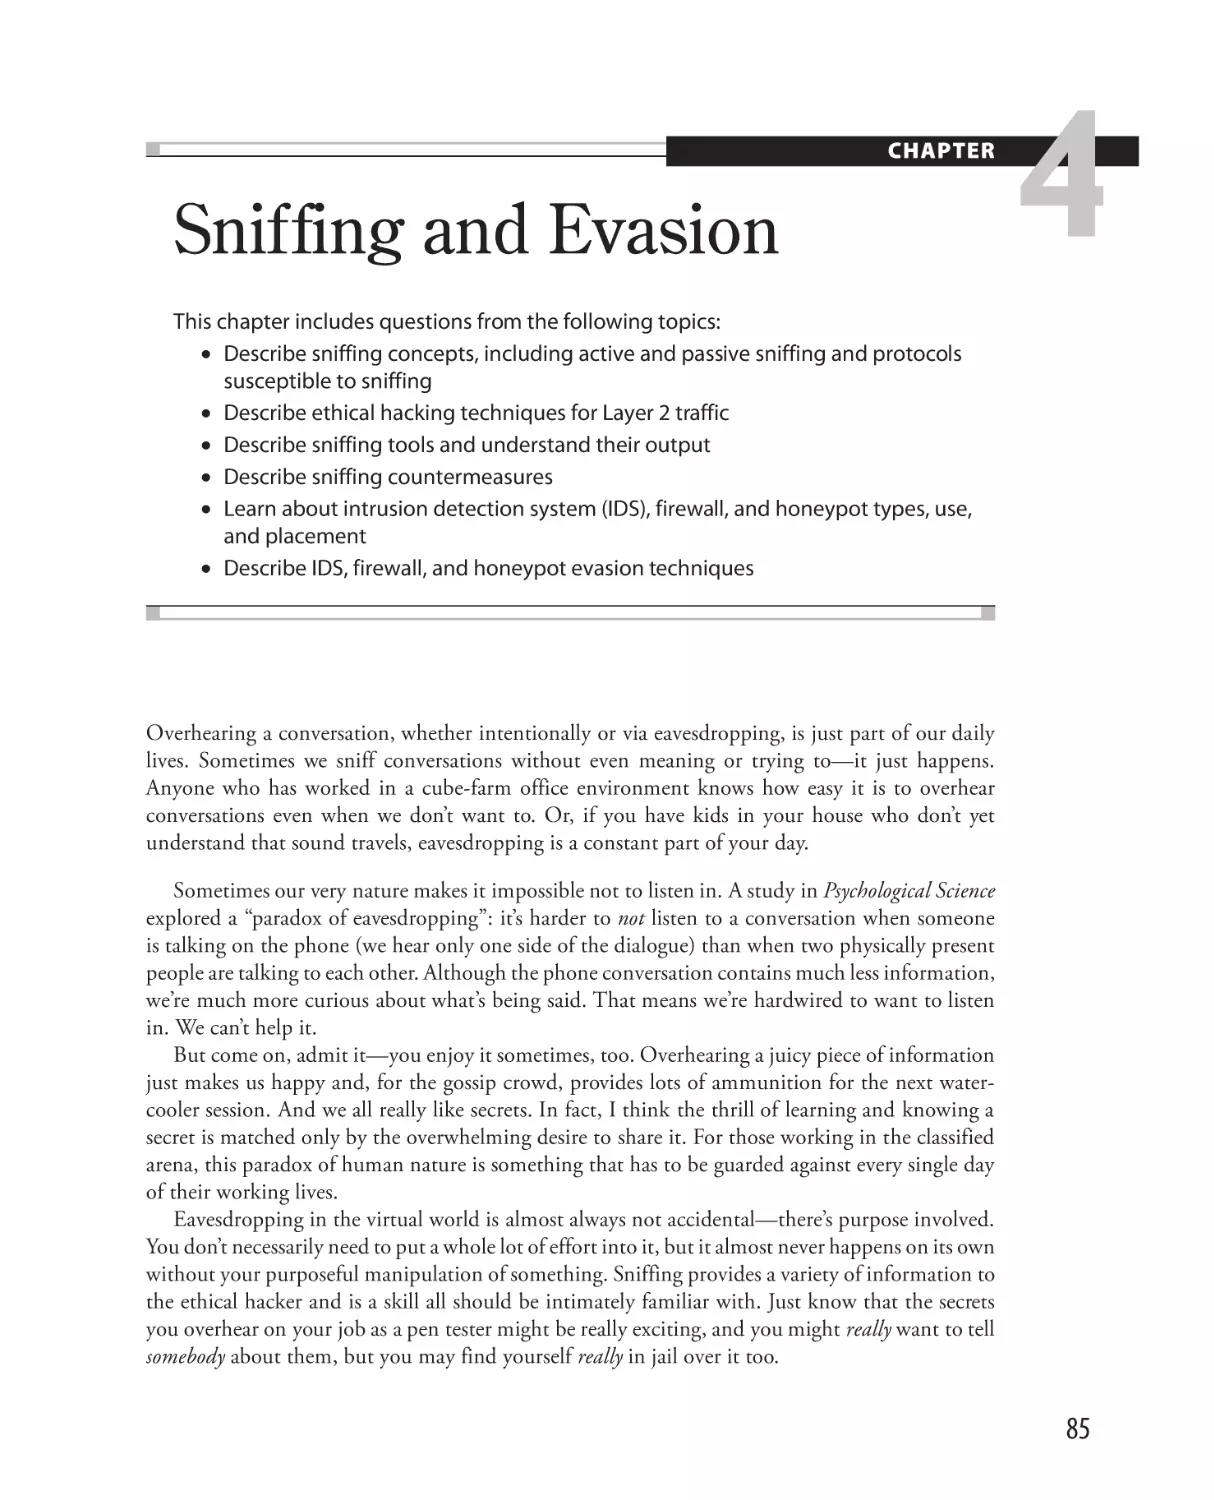 Sniffing and Evasion